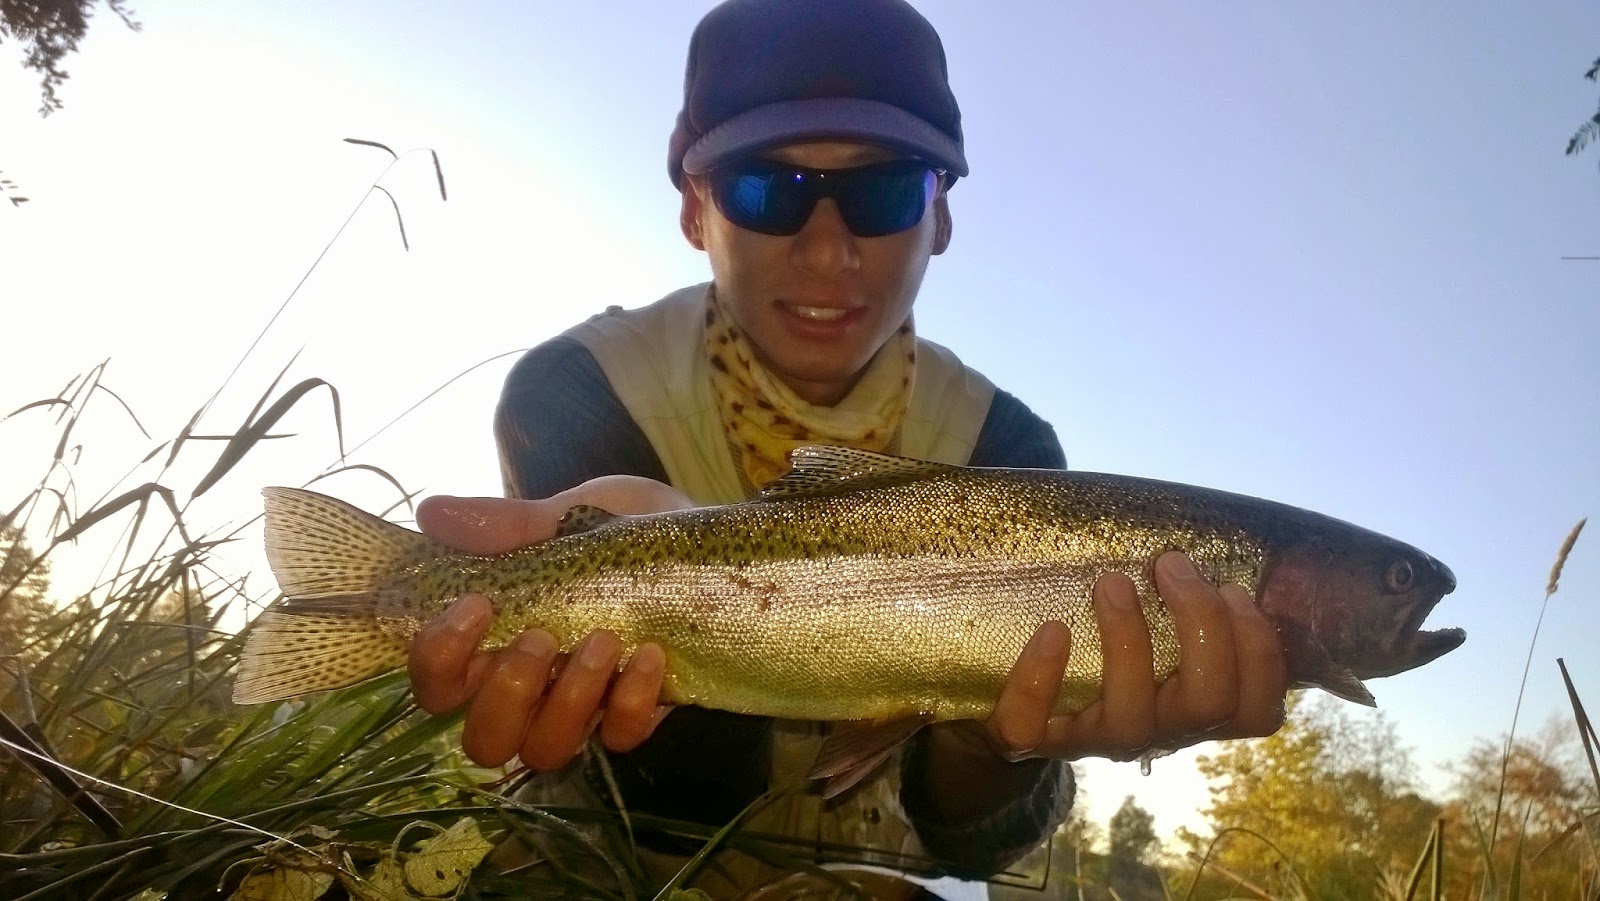 Yuba goldfields – Keep Calm and Fly Fish